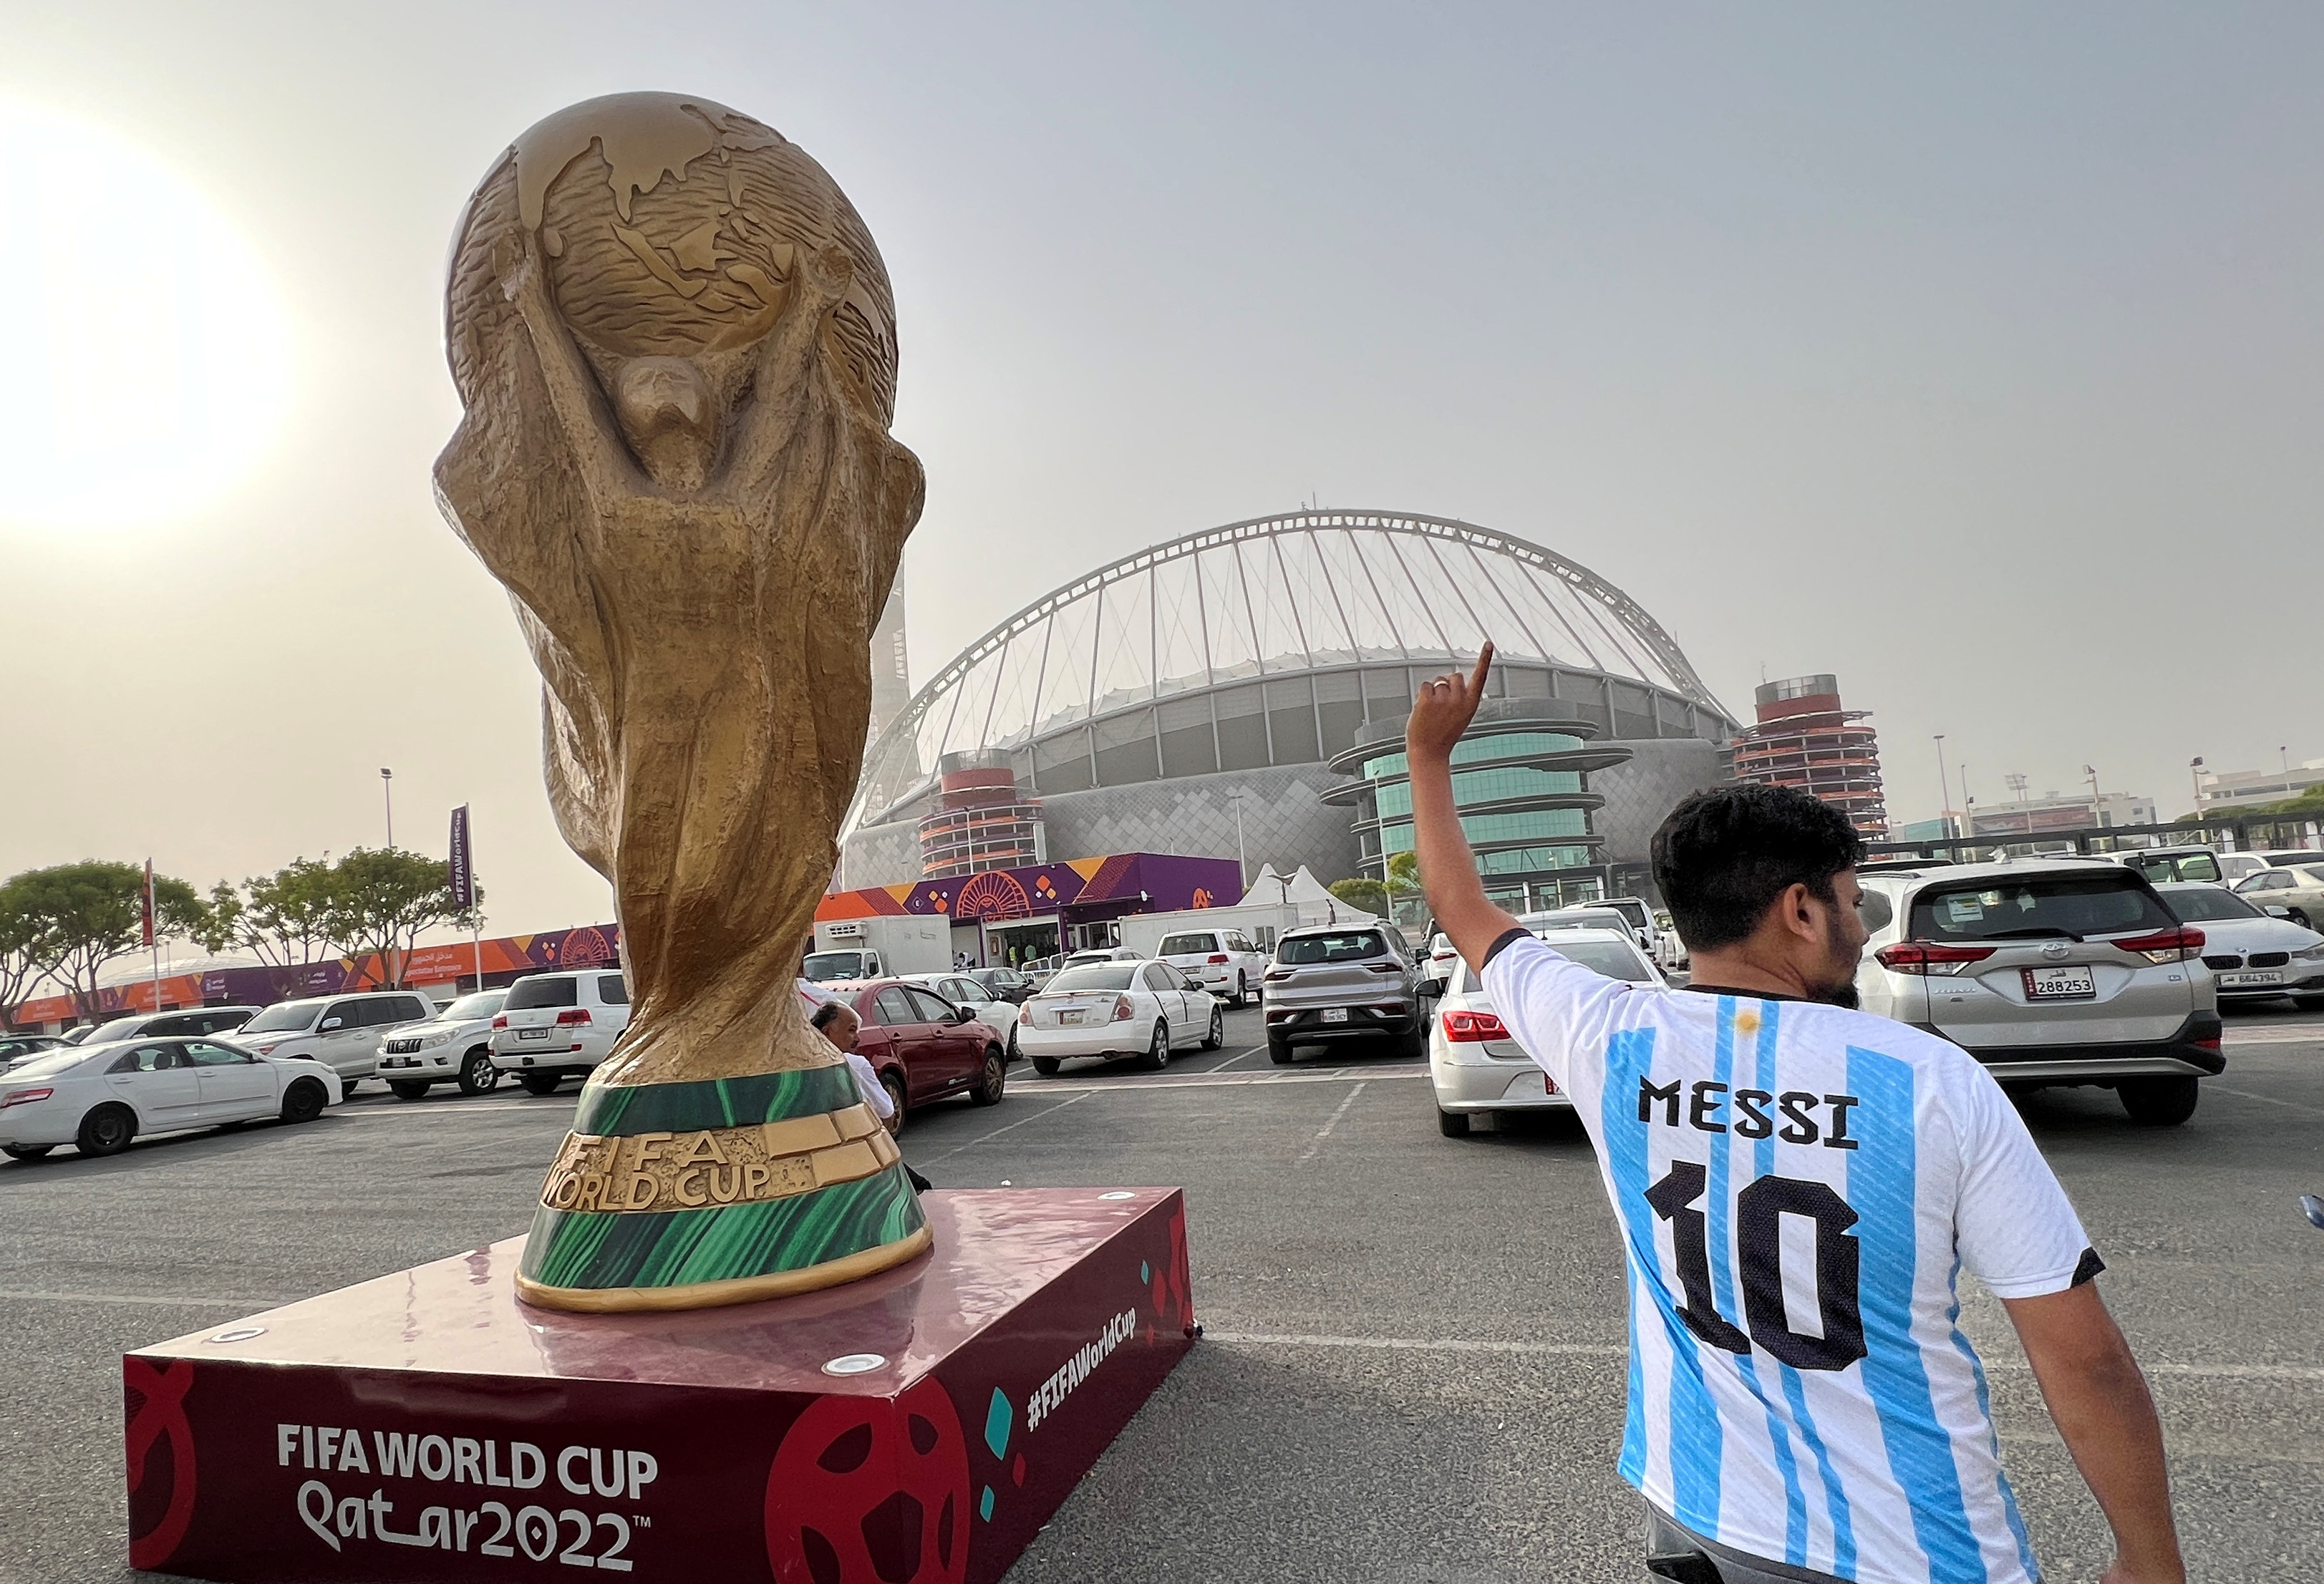 A sculpture of the World Cup trophy is pictured in front of Khalifa International Stadium ahead of the FIFA 2022 Worldcup soccer tournament in Doha, Qatar November 9, 2022. REUTERS/Stringer